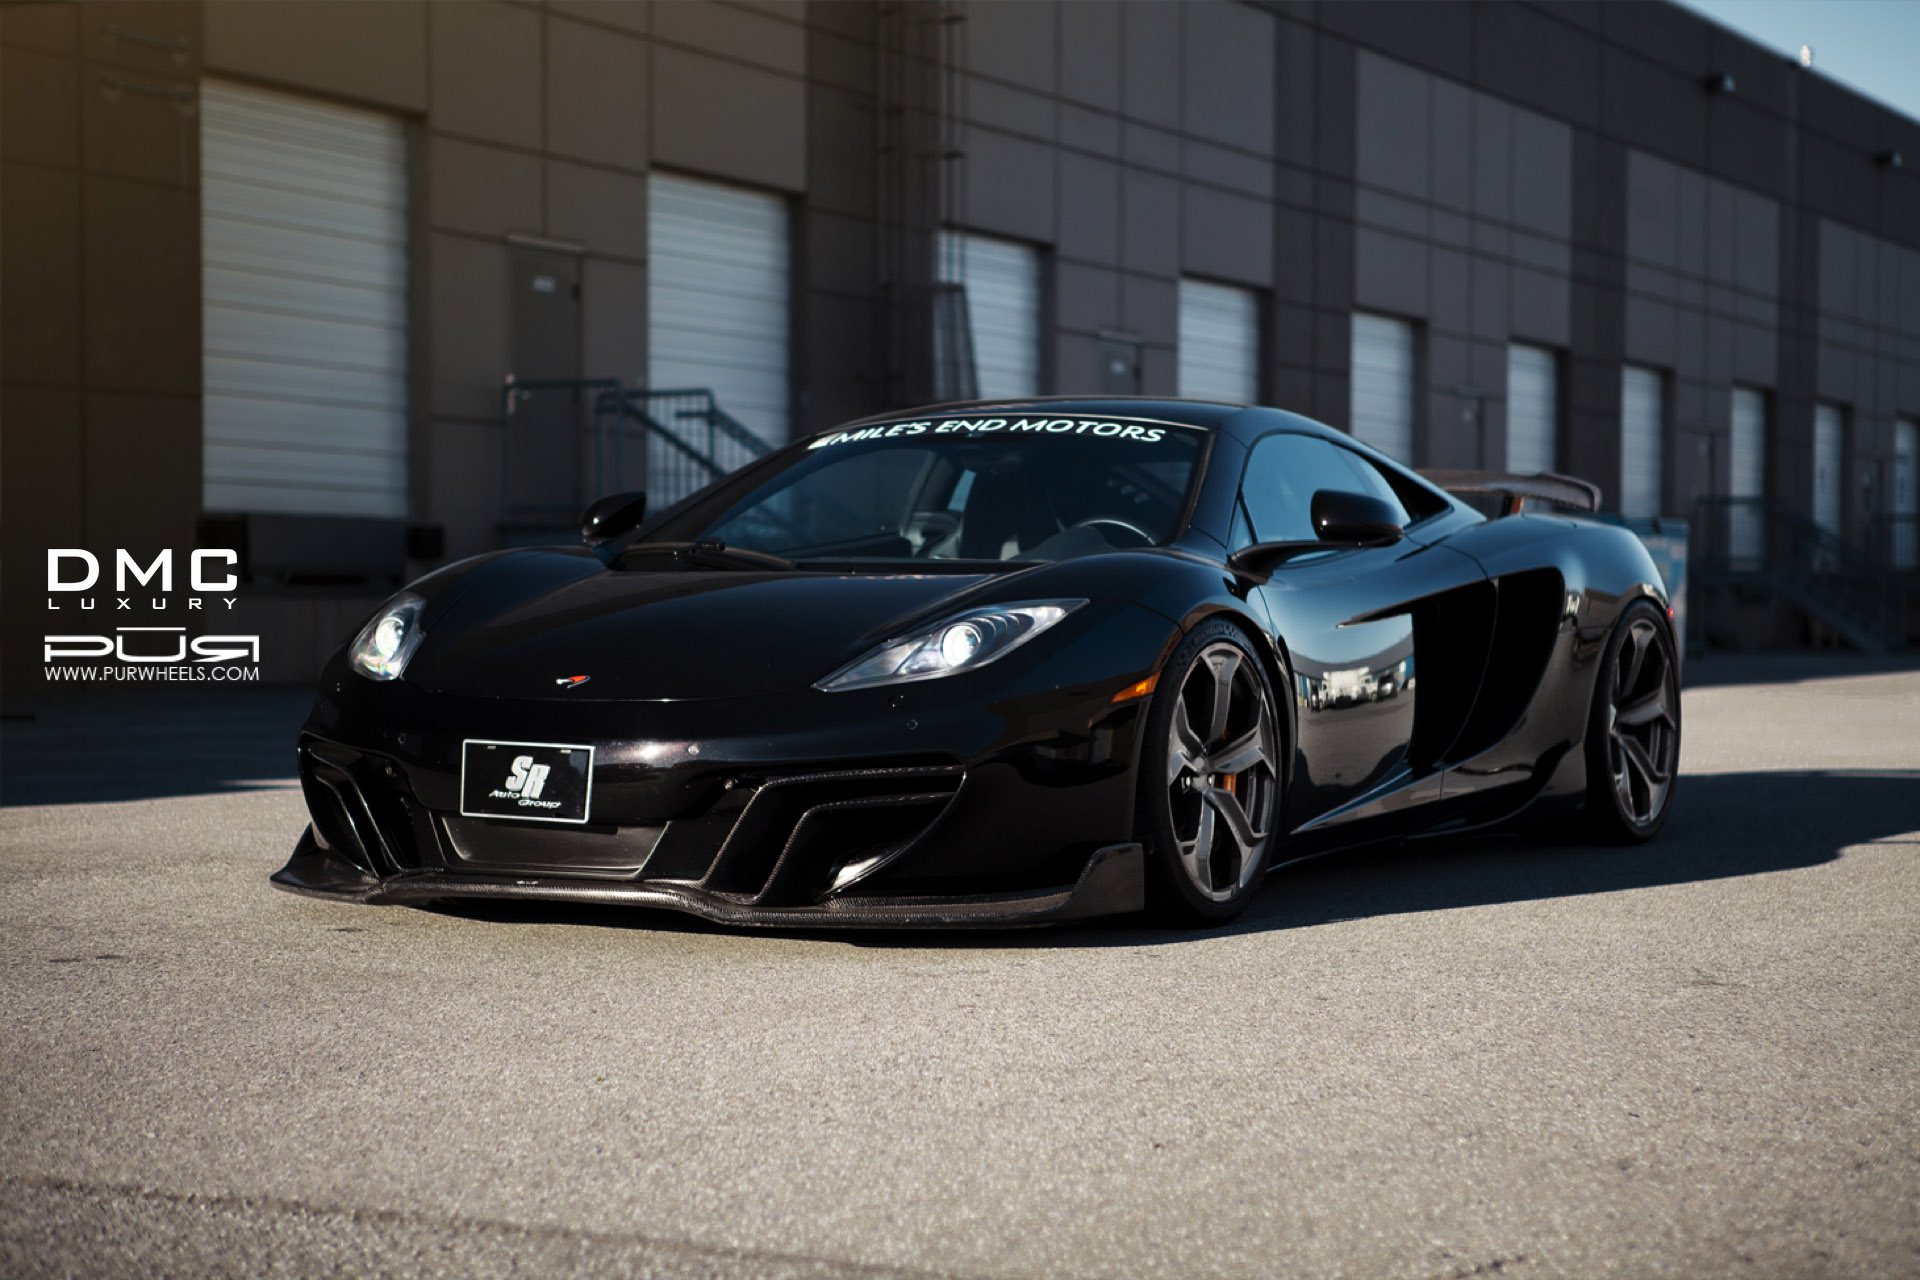 McLaren MP4-12C by DMC Luxury and PUR WHEELS